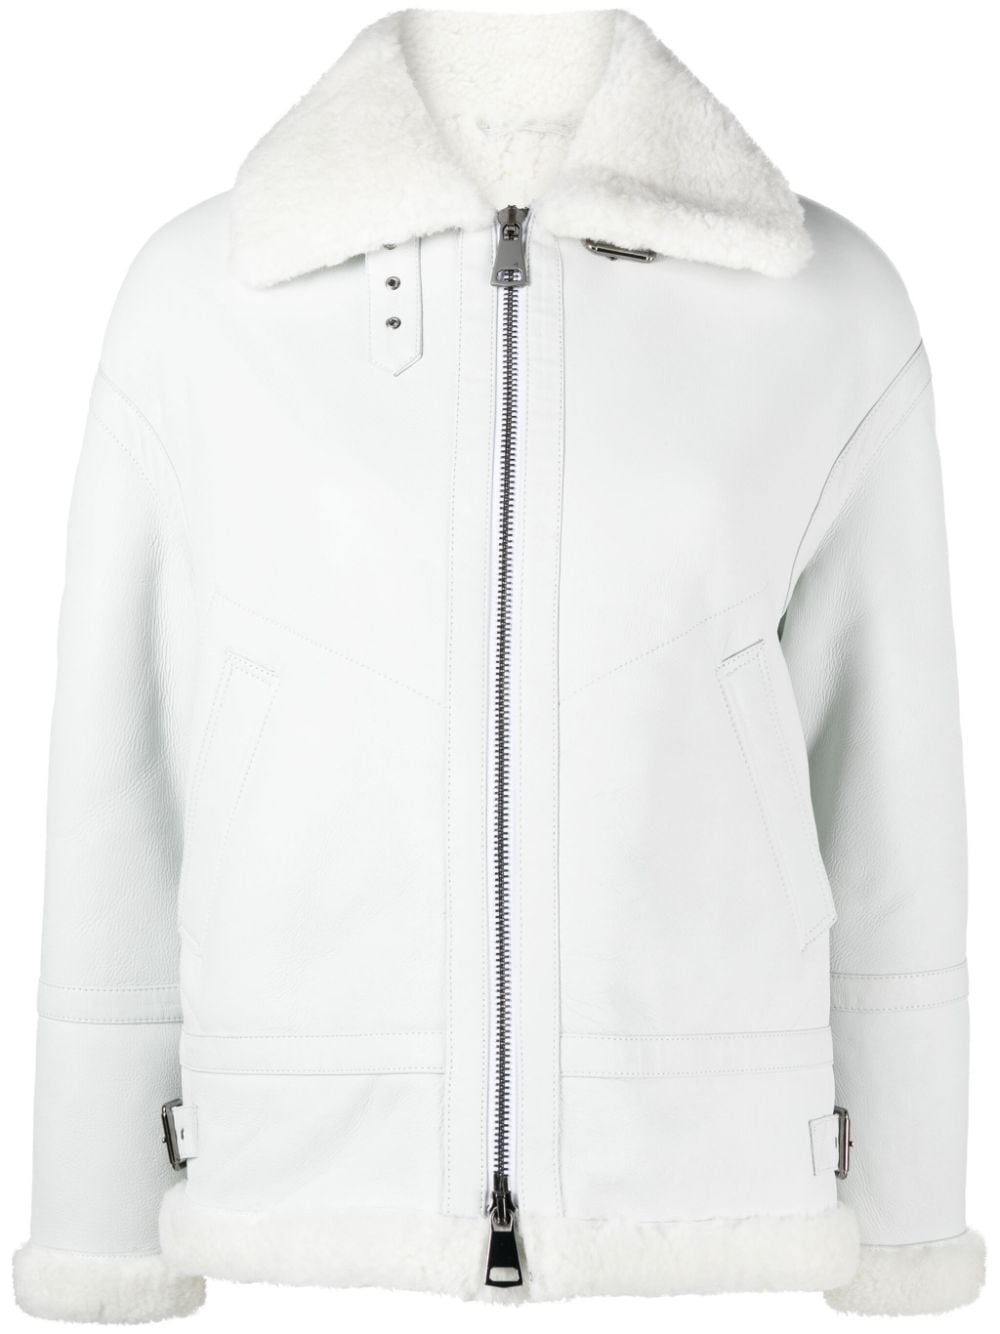 S.W.O.R.D 6.6.44 shearling-lined leather jacket - White von S.W.O.R.D 6.6.44